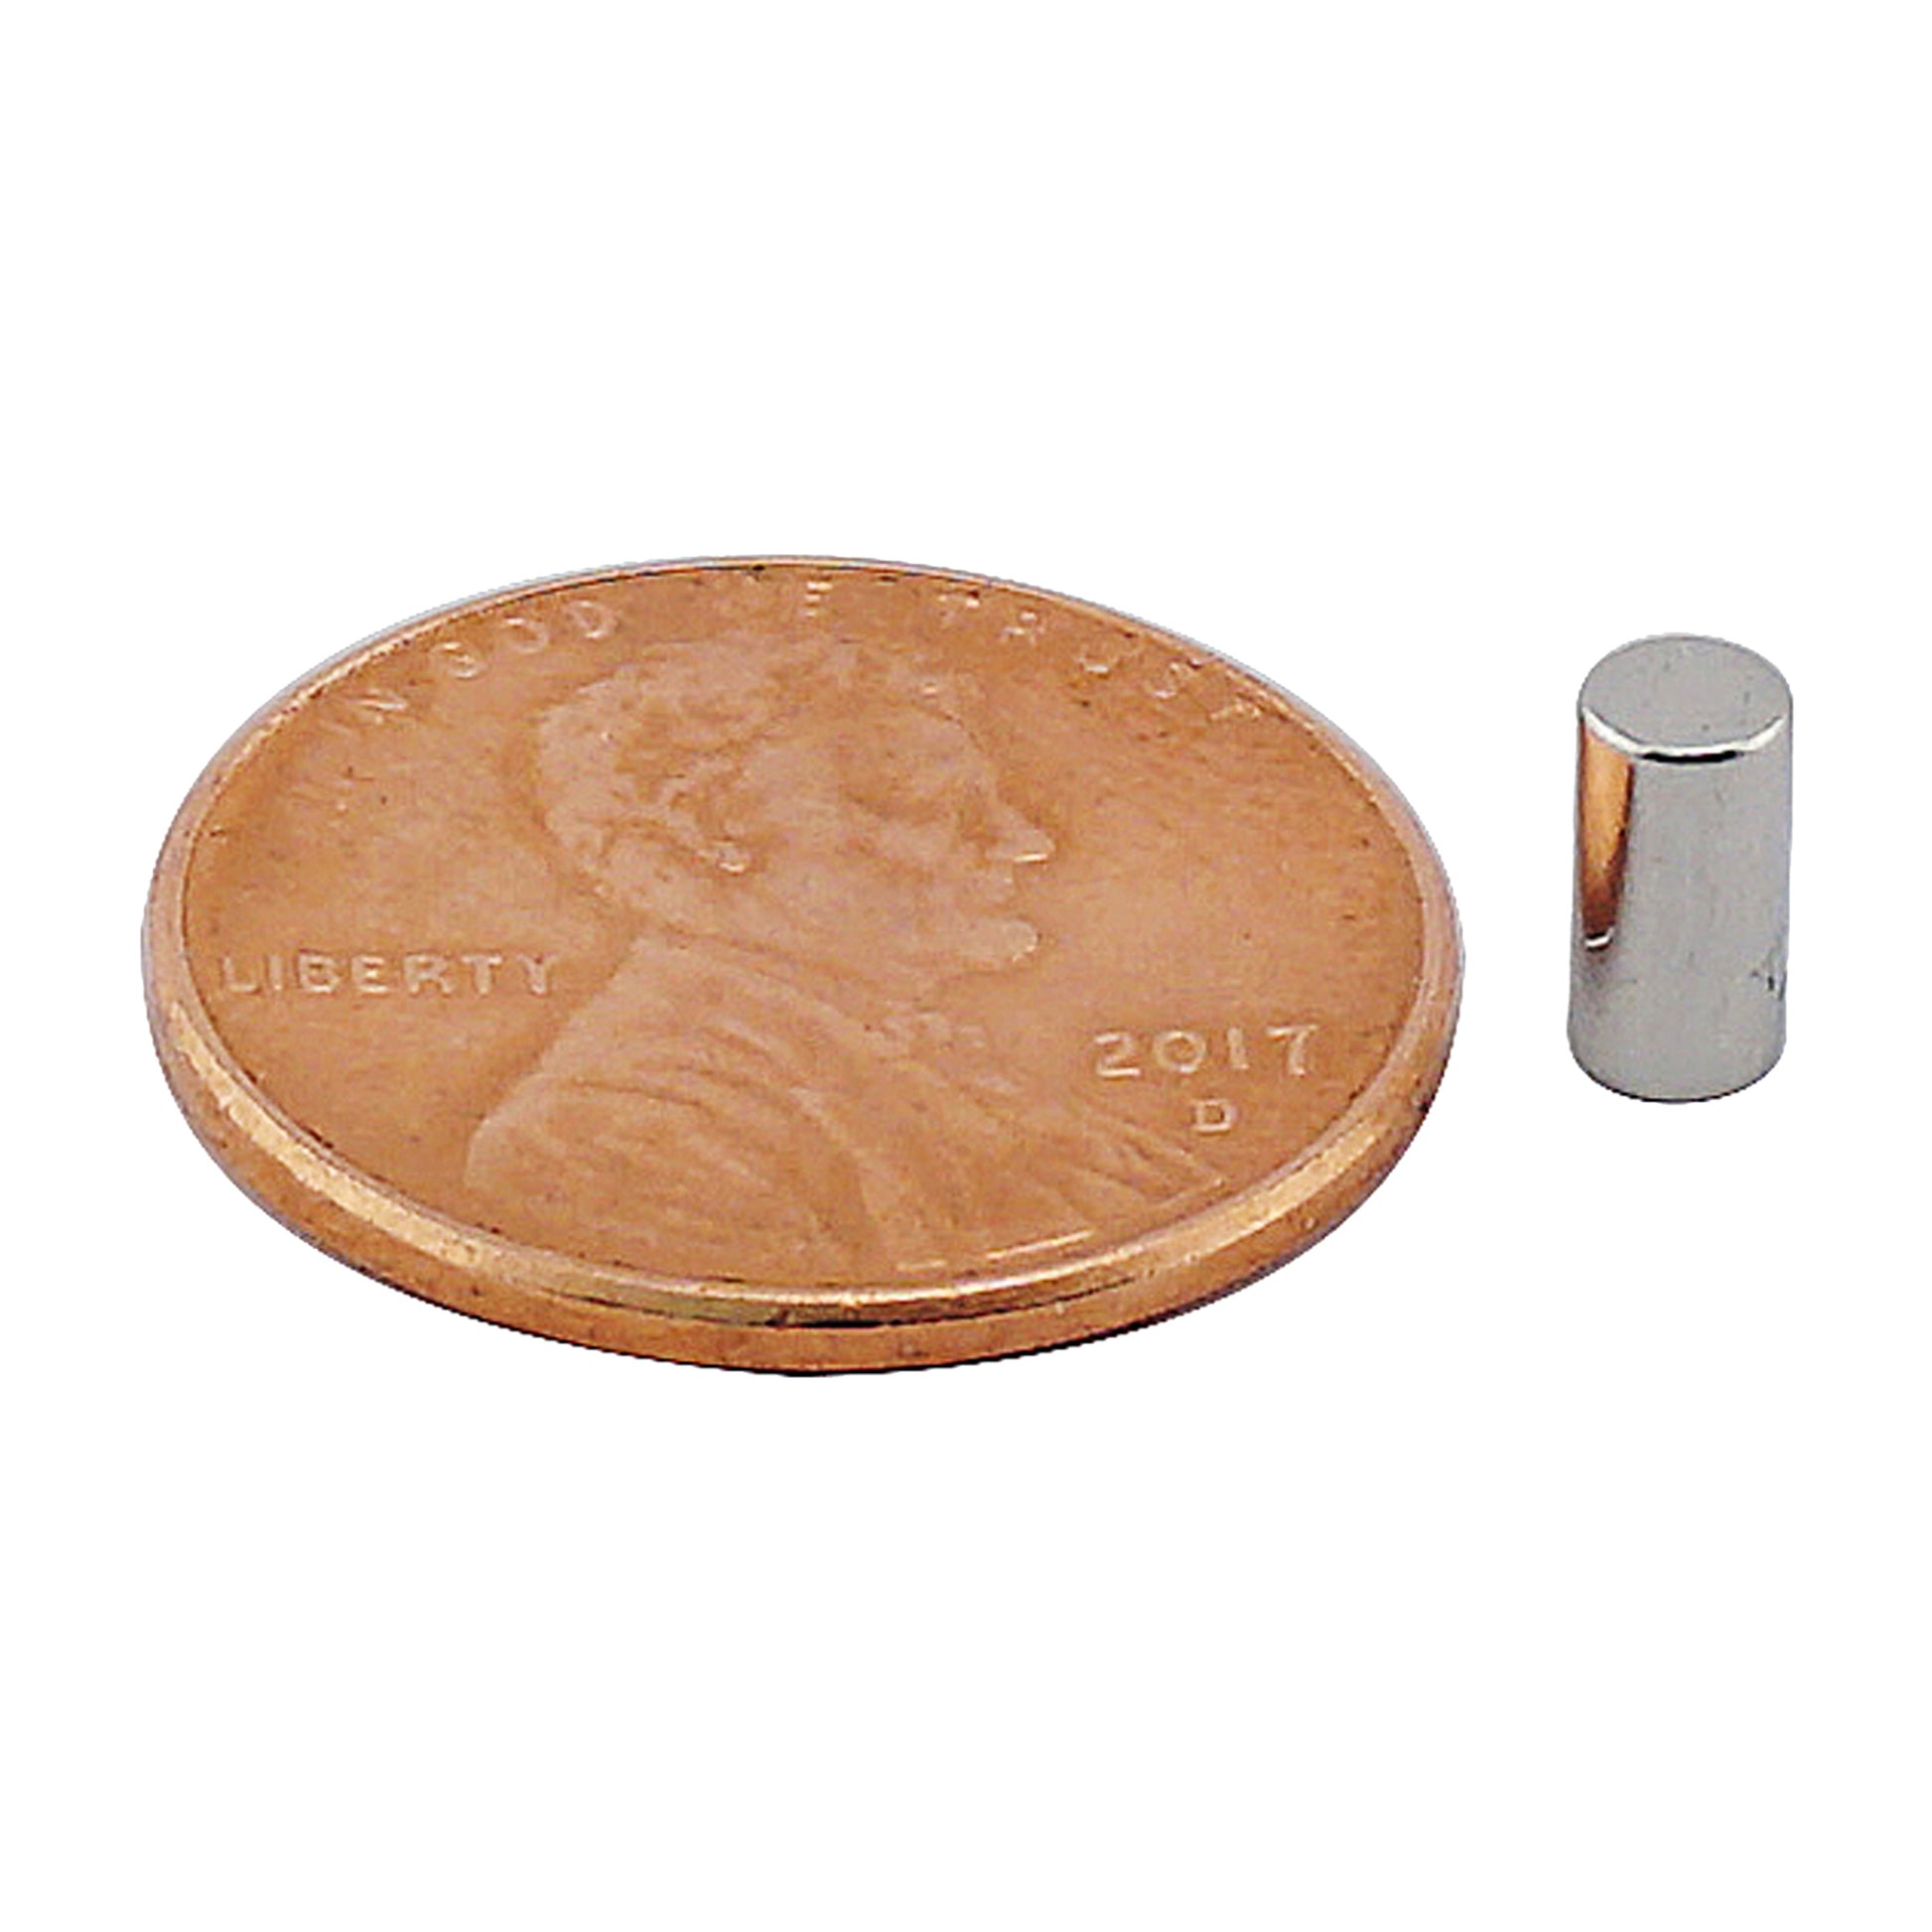 Load image into Gallery viewer, ND12525N-35 Neodymium Disc Magnet - Compared to Penny for Size Reference